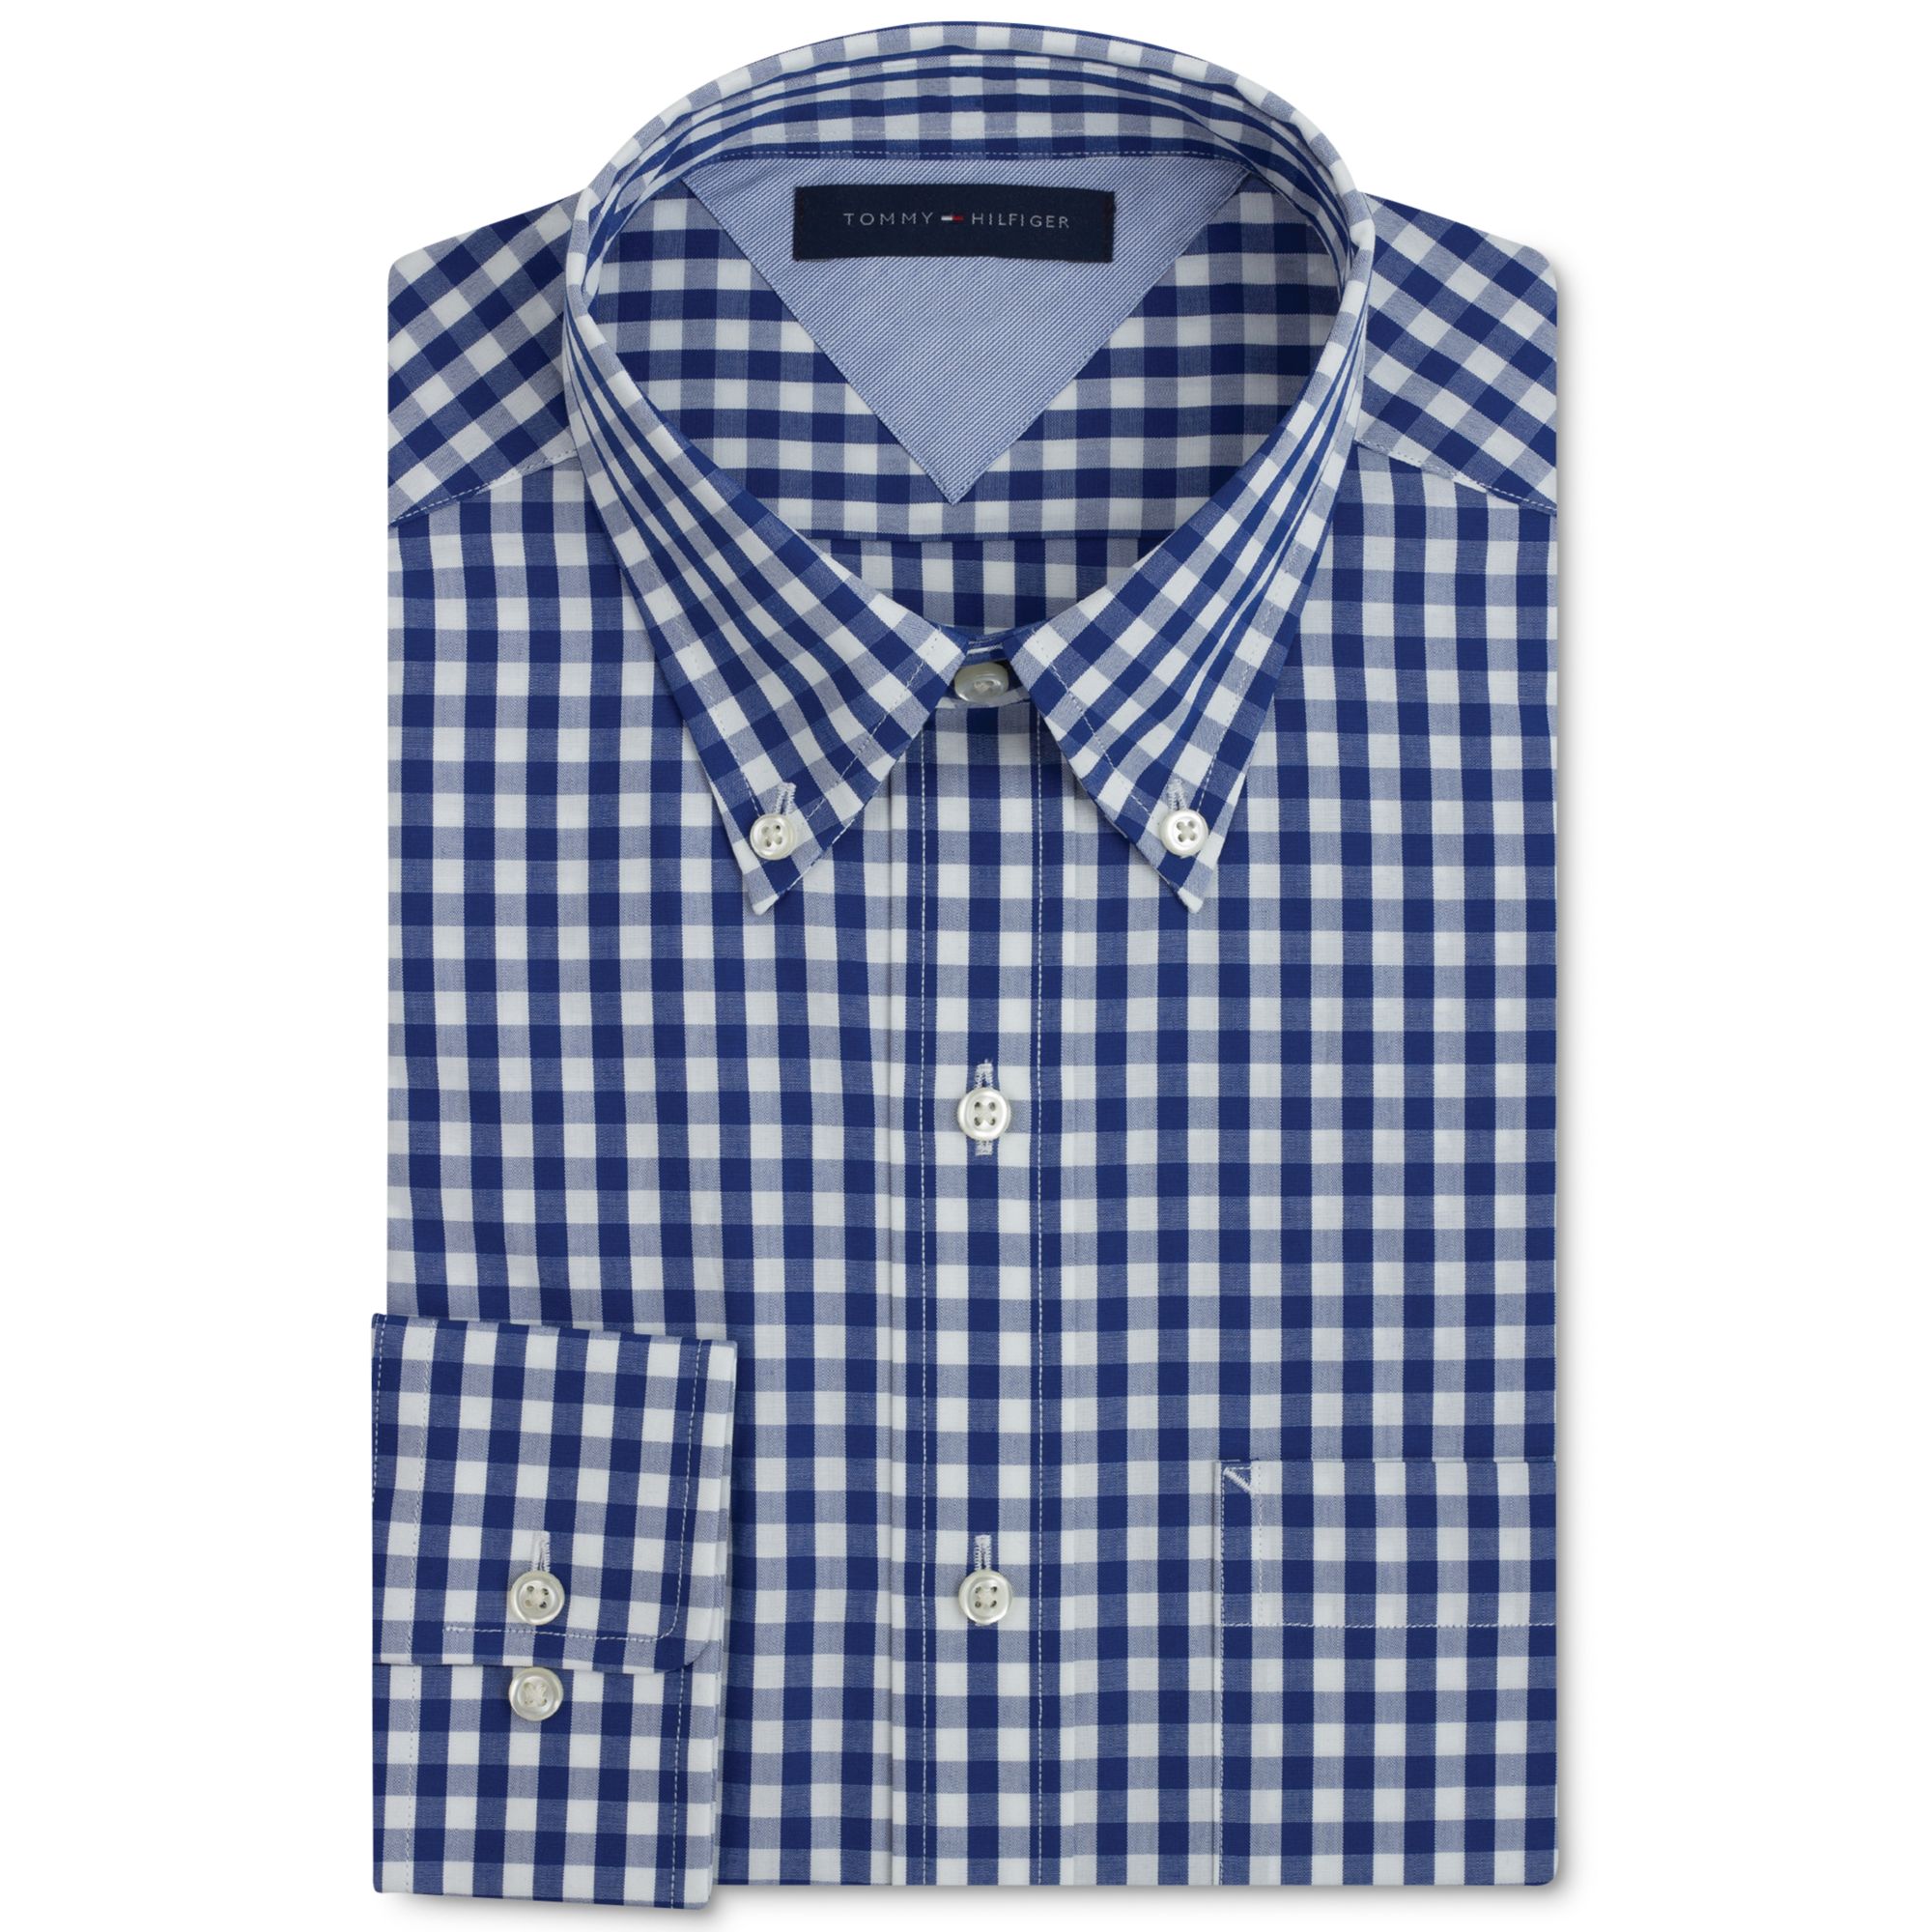 Lyst - Tommy Hilfiger Blue and White Wide Box Check Long Sleeved Shirt ...